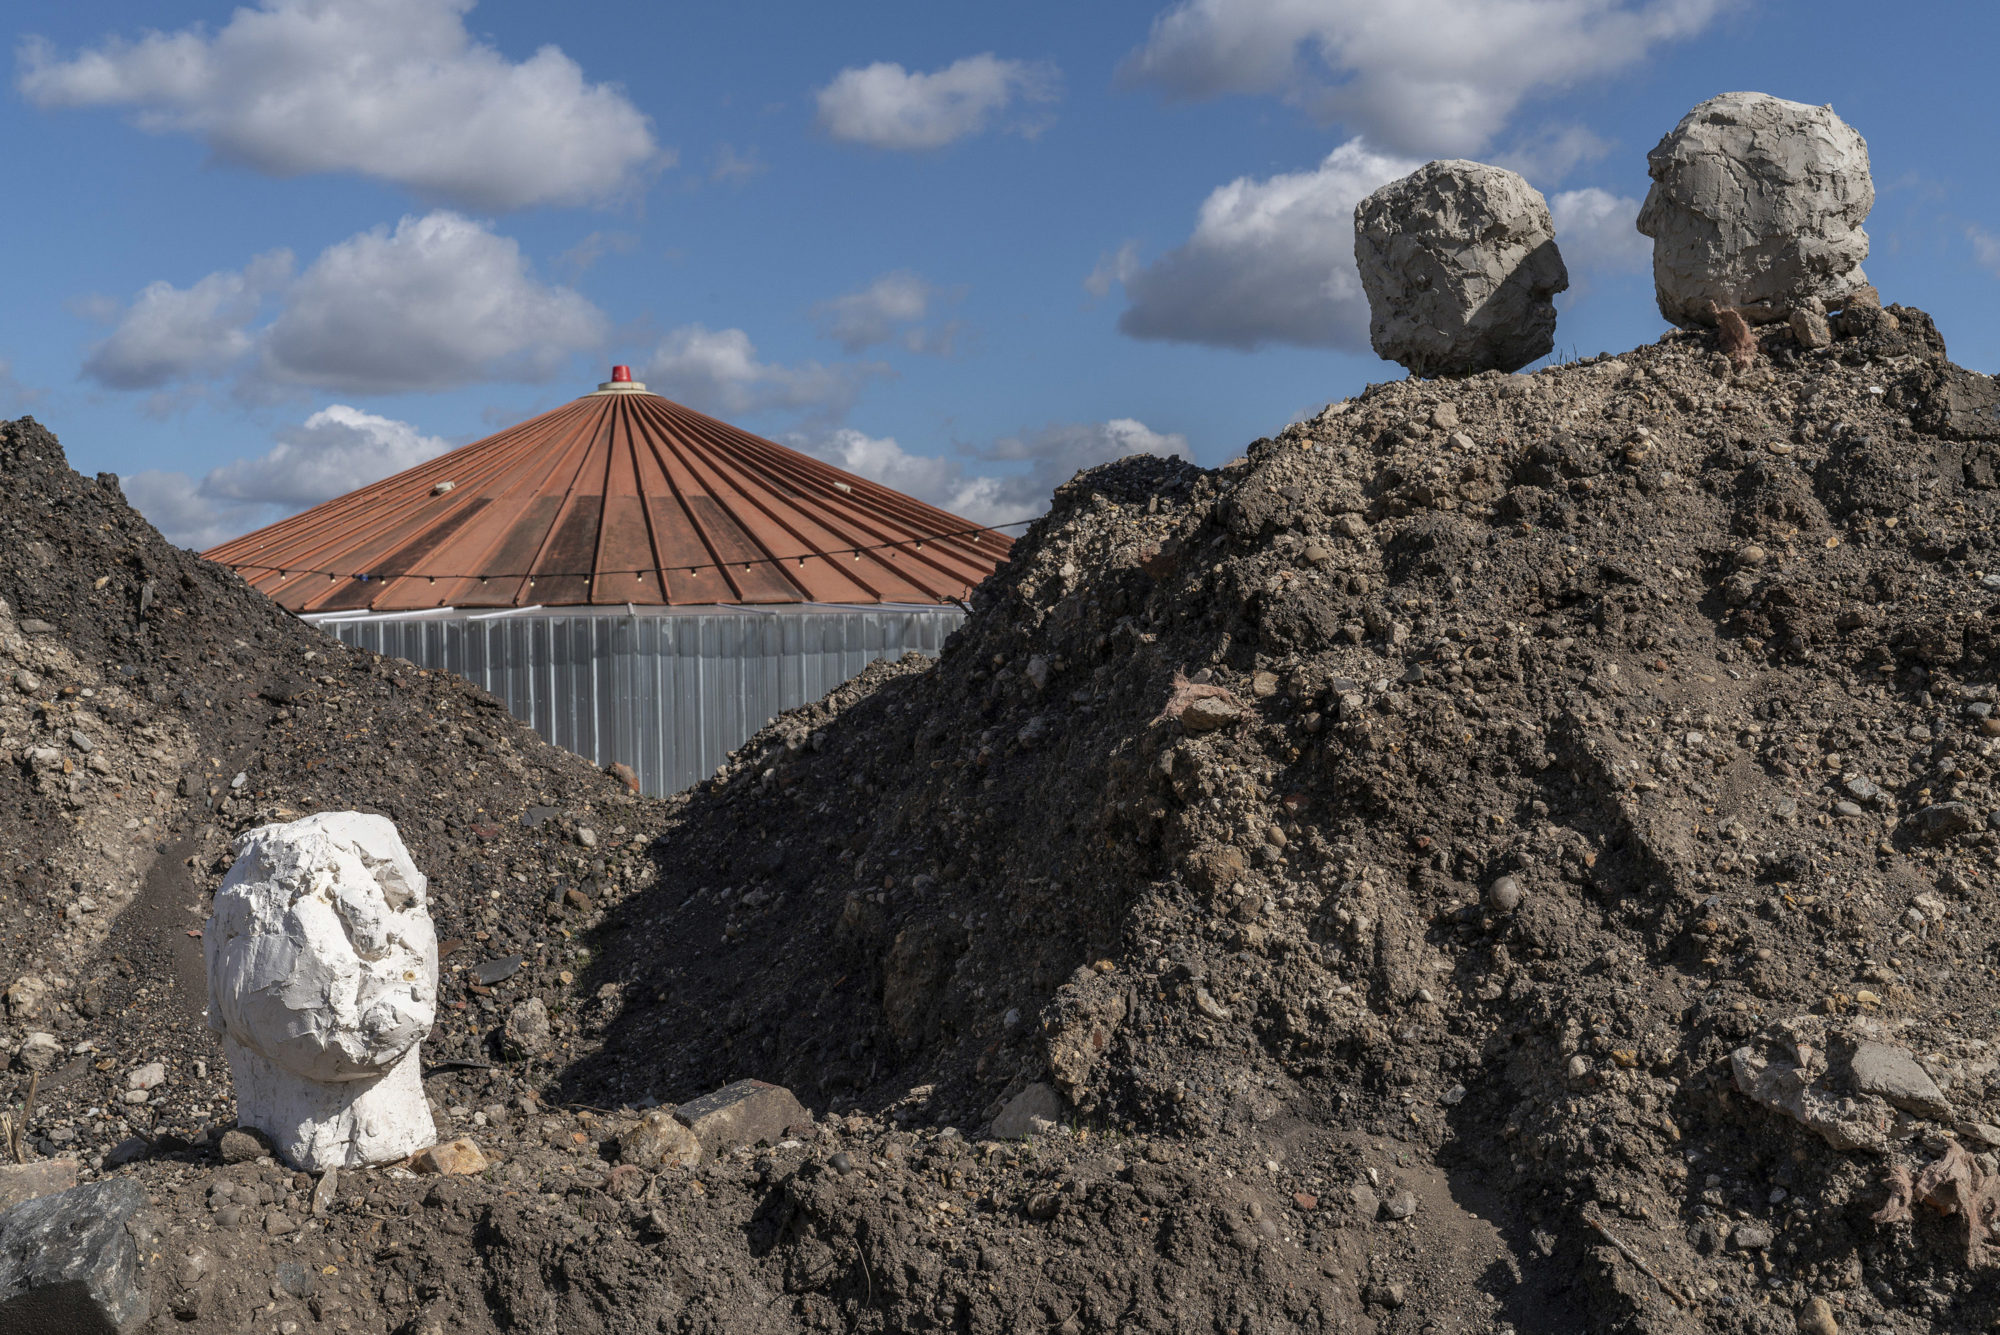 view of mounds of dirt with three rock structures of heads and a clear blue sky in the background